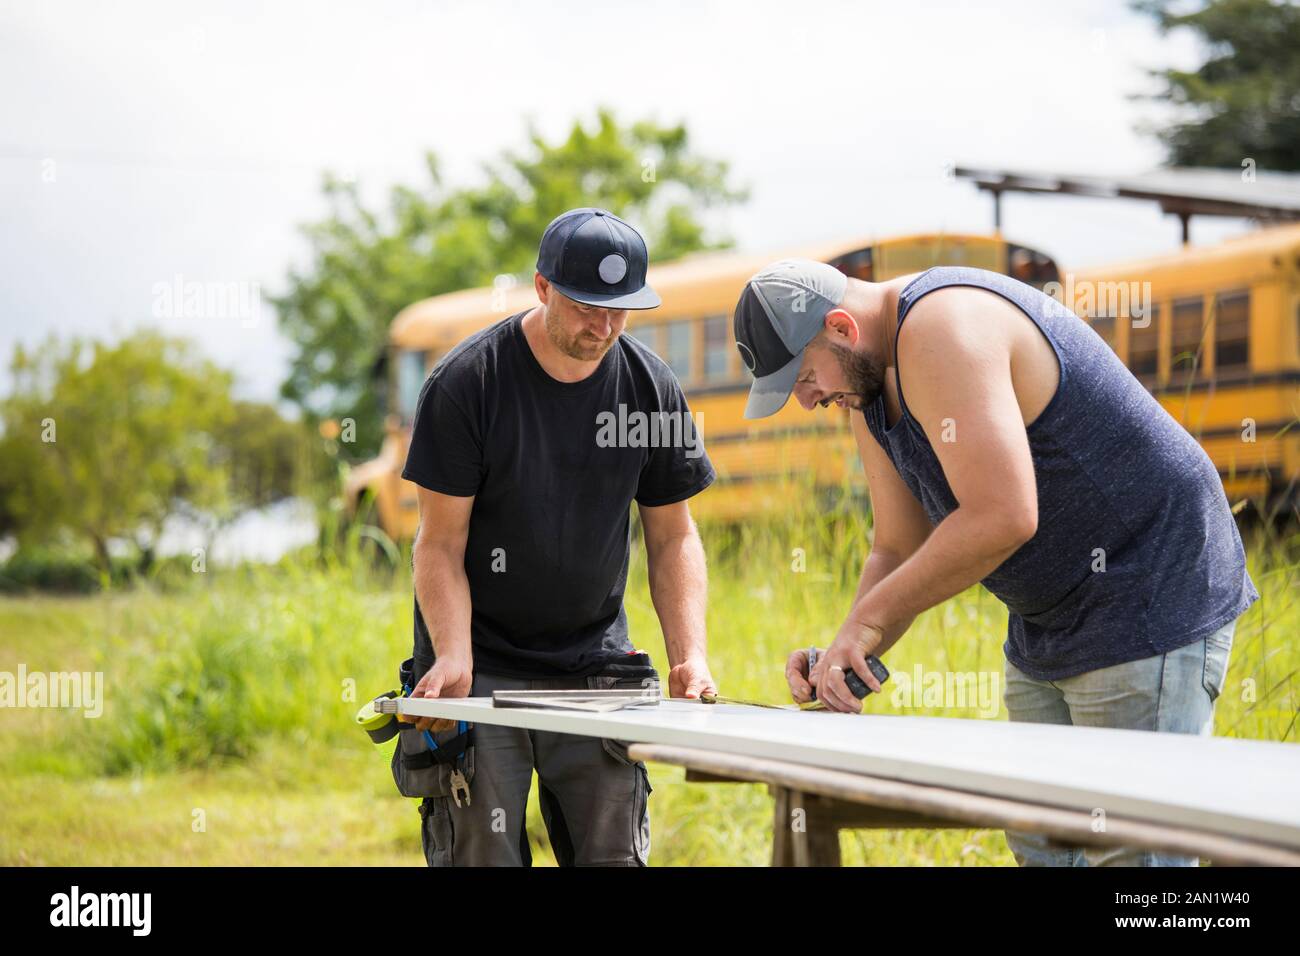 Two men working to assemble solar panels. Stock Photo